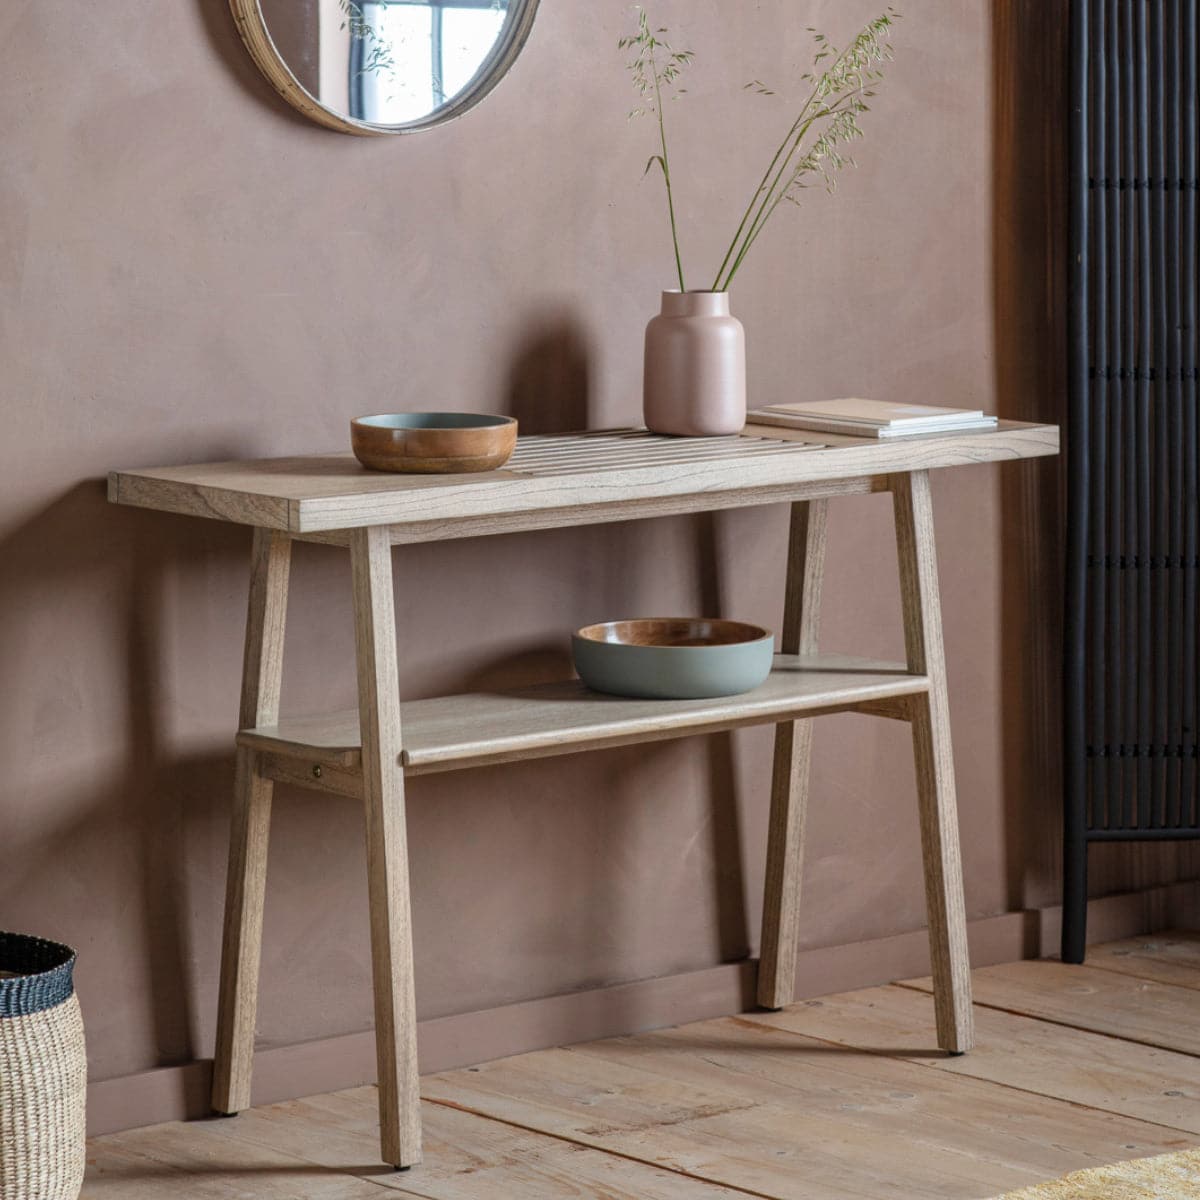 Slatted Top Wooden Console Table - The Farthing